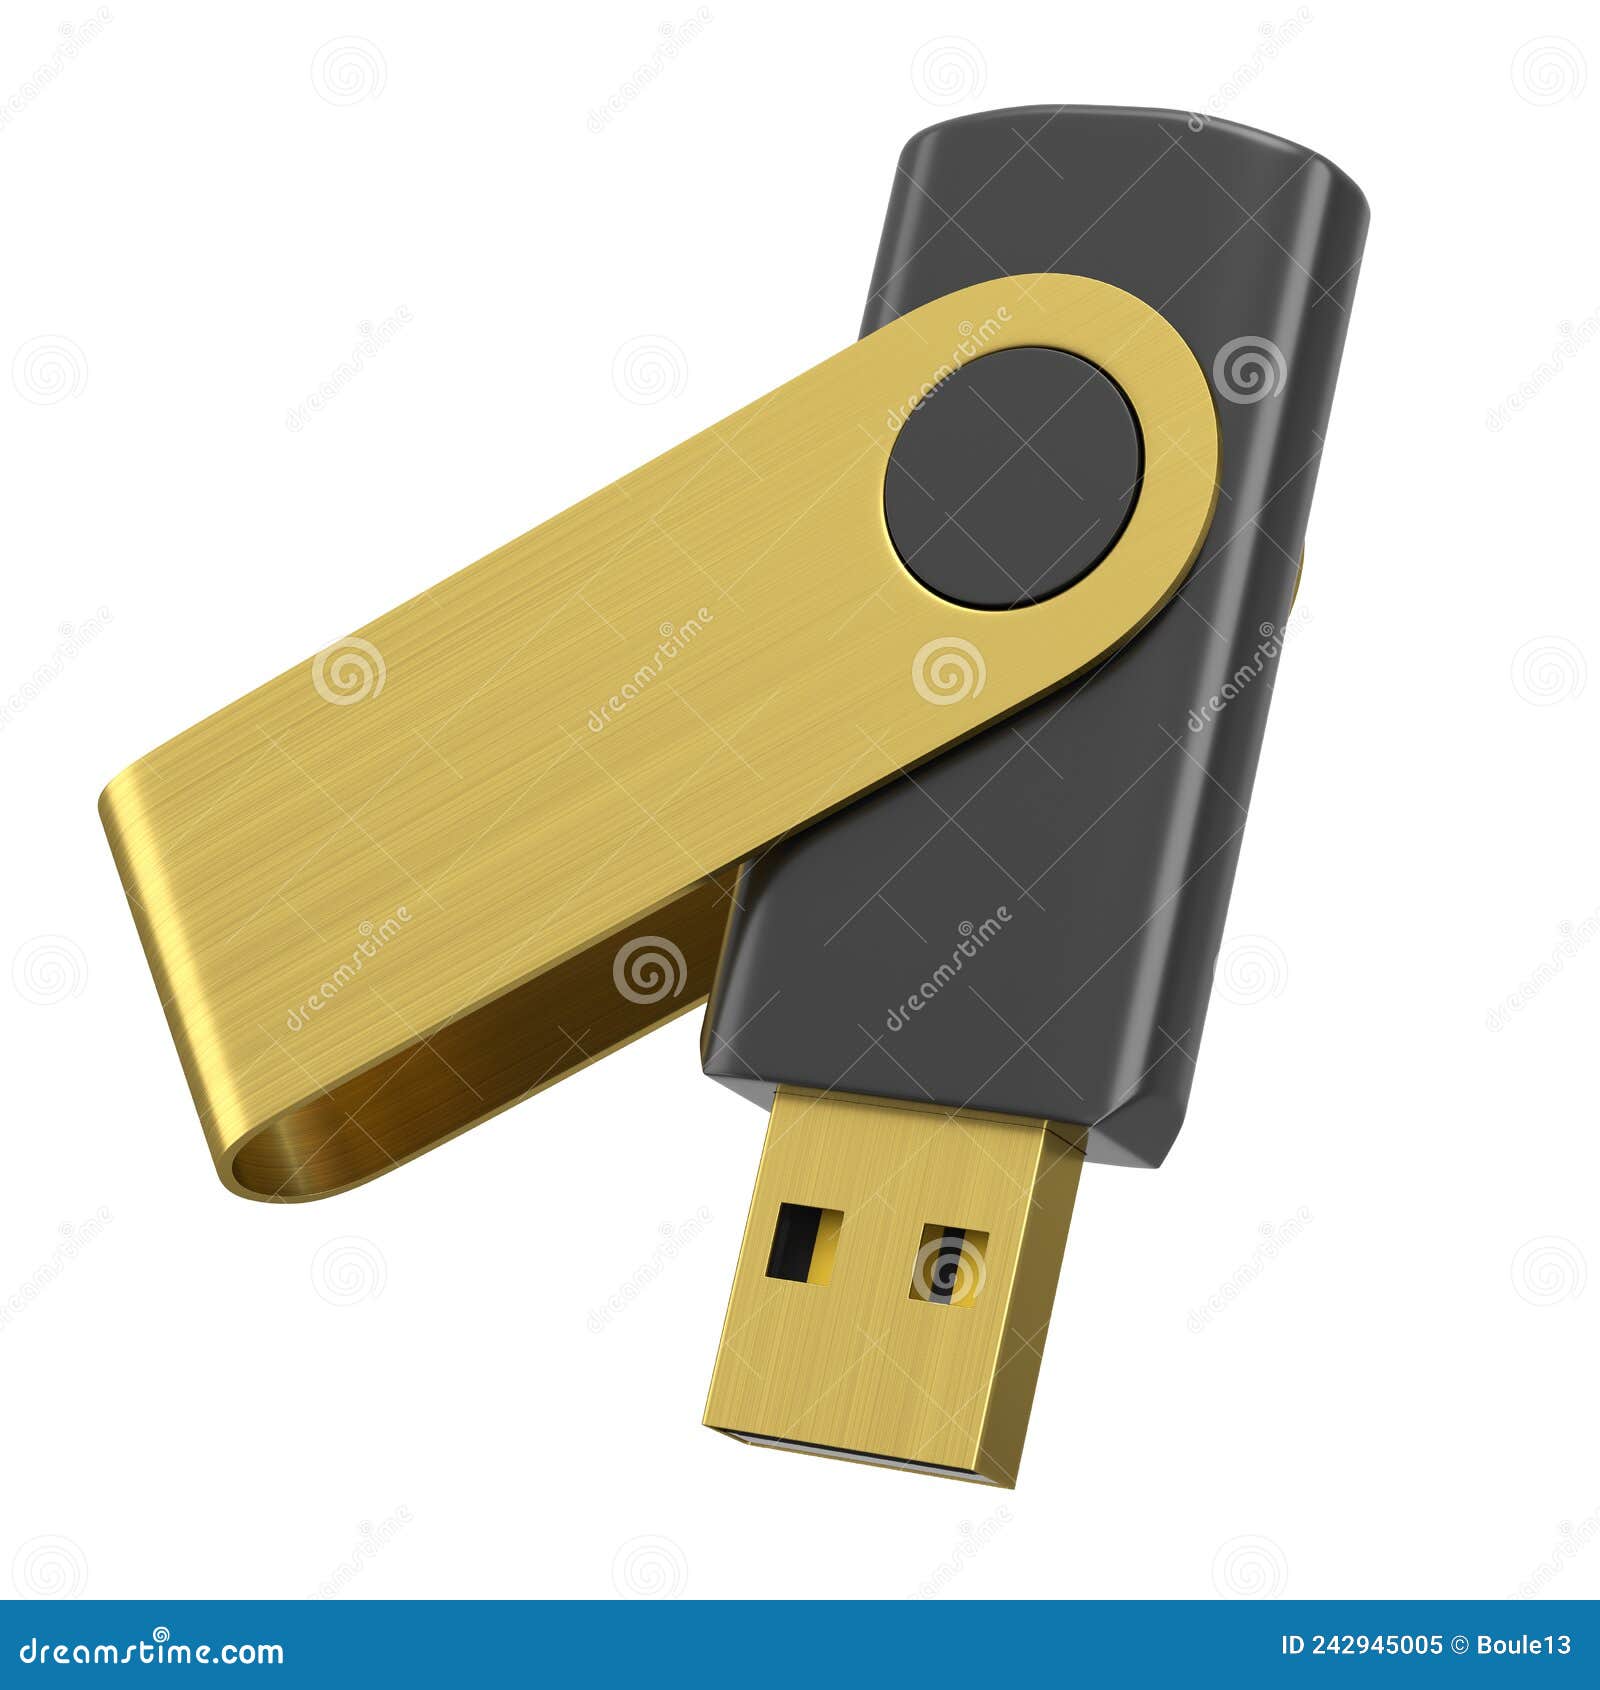 Portable USB Flash Drive Stick for Workspace Isolated White Background Stock Illustration - Illustration of file, metal: